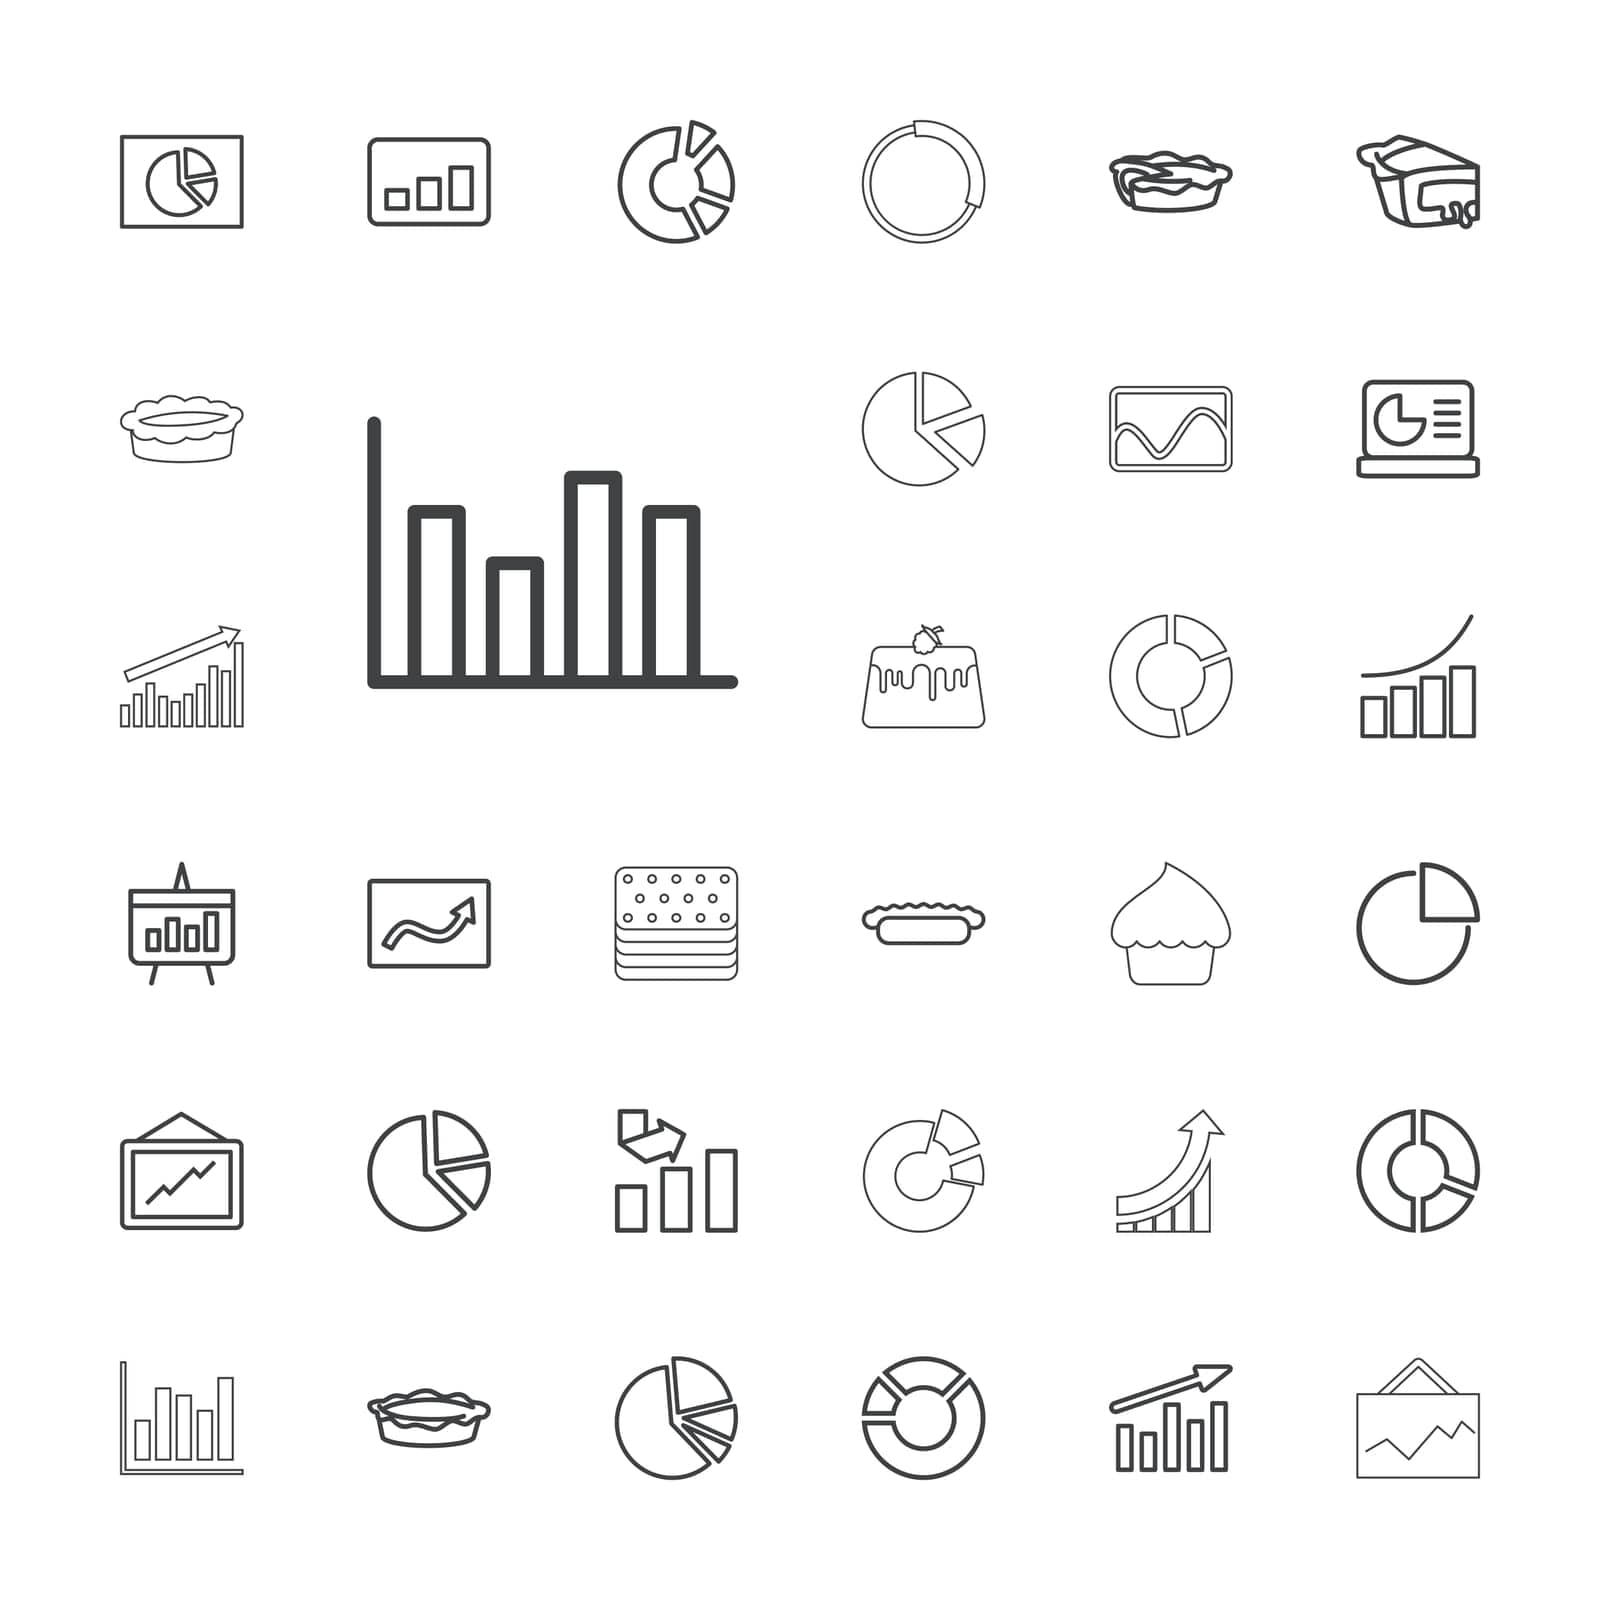 symbol,infographic,arrow,line,concept,icon,sign,isolated,pie,bar,white,web,flat,cake,design,of,vector,graphic,element,on,statistic,art,set,business,display,black,abstract,economy,graph,diagram,market,piece,background,information,growth,illustration,chart,finance by ogqcorp